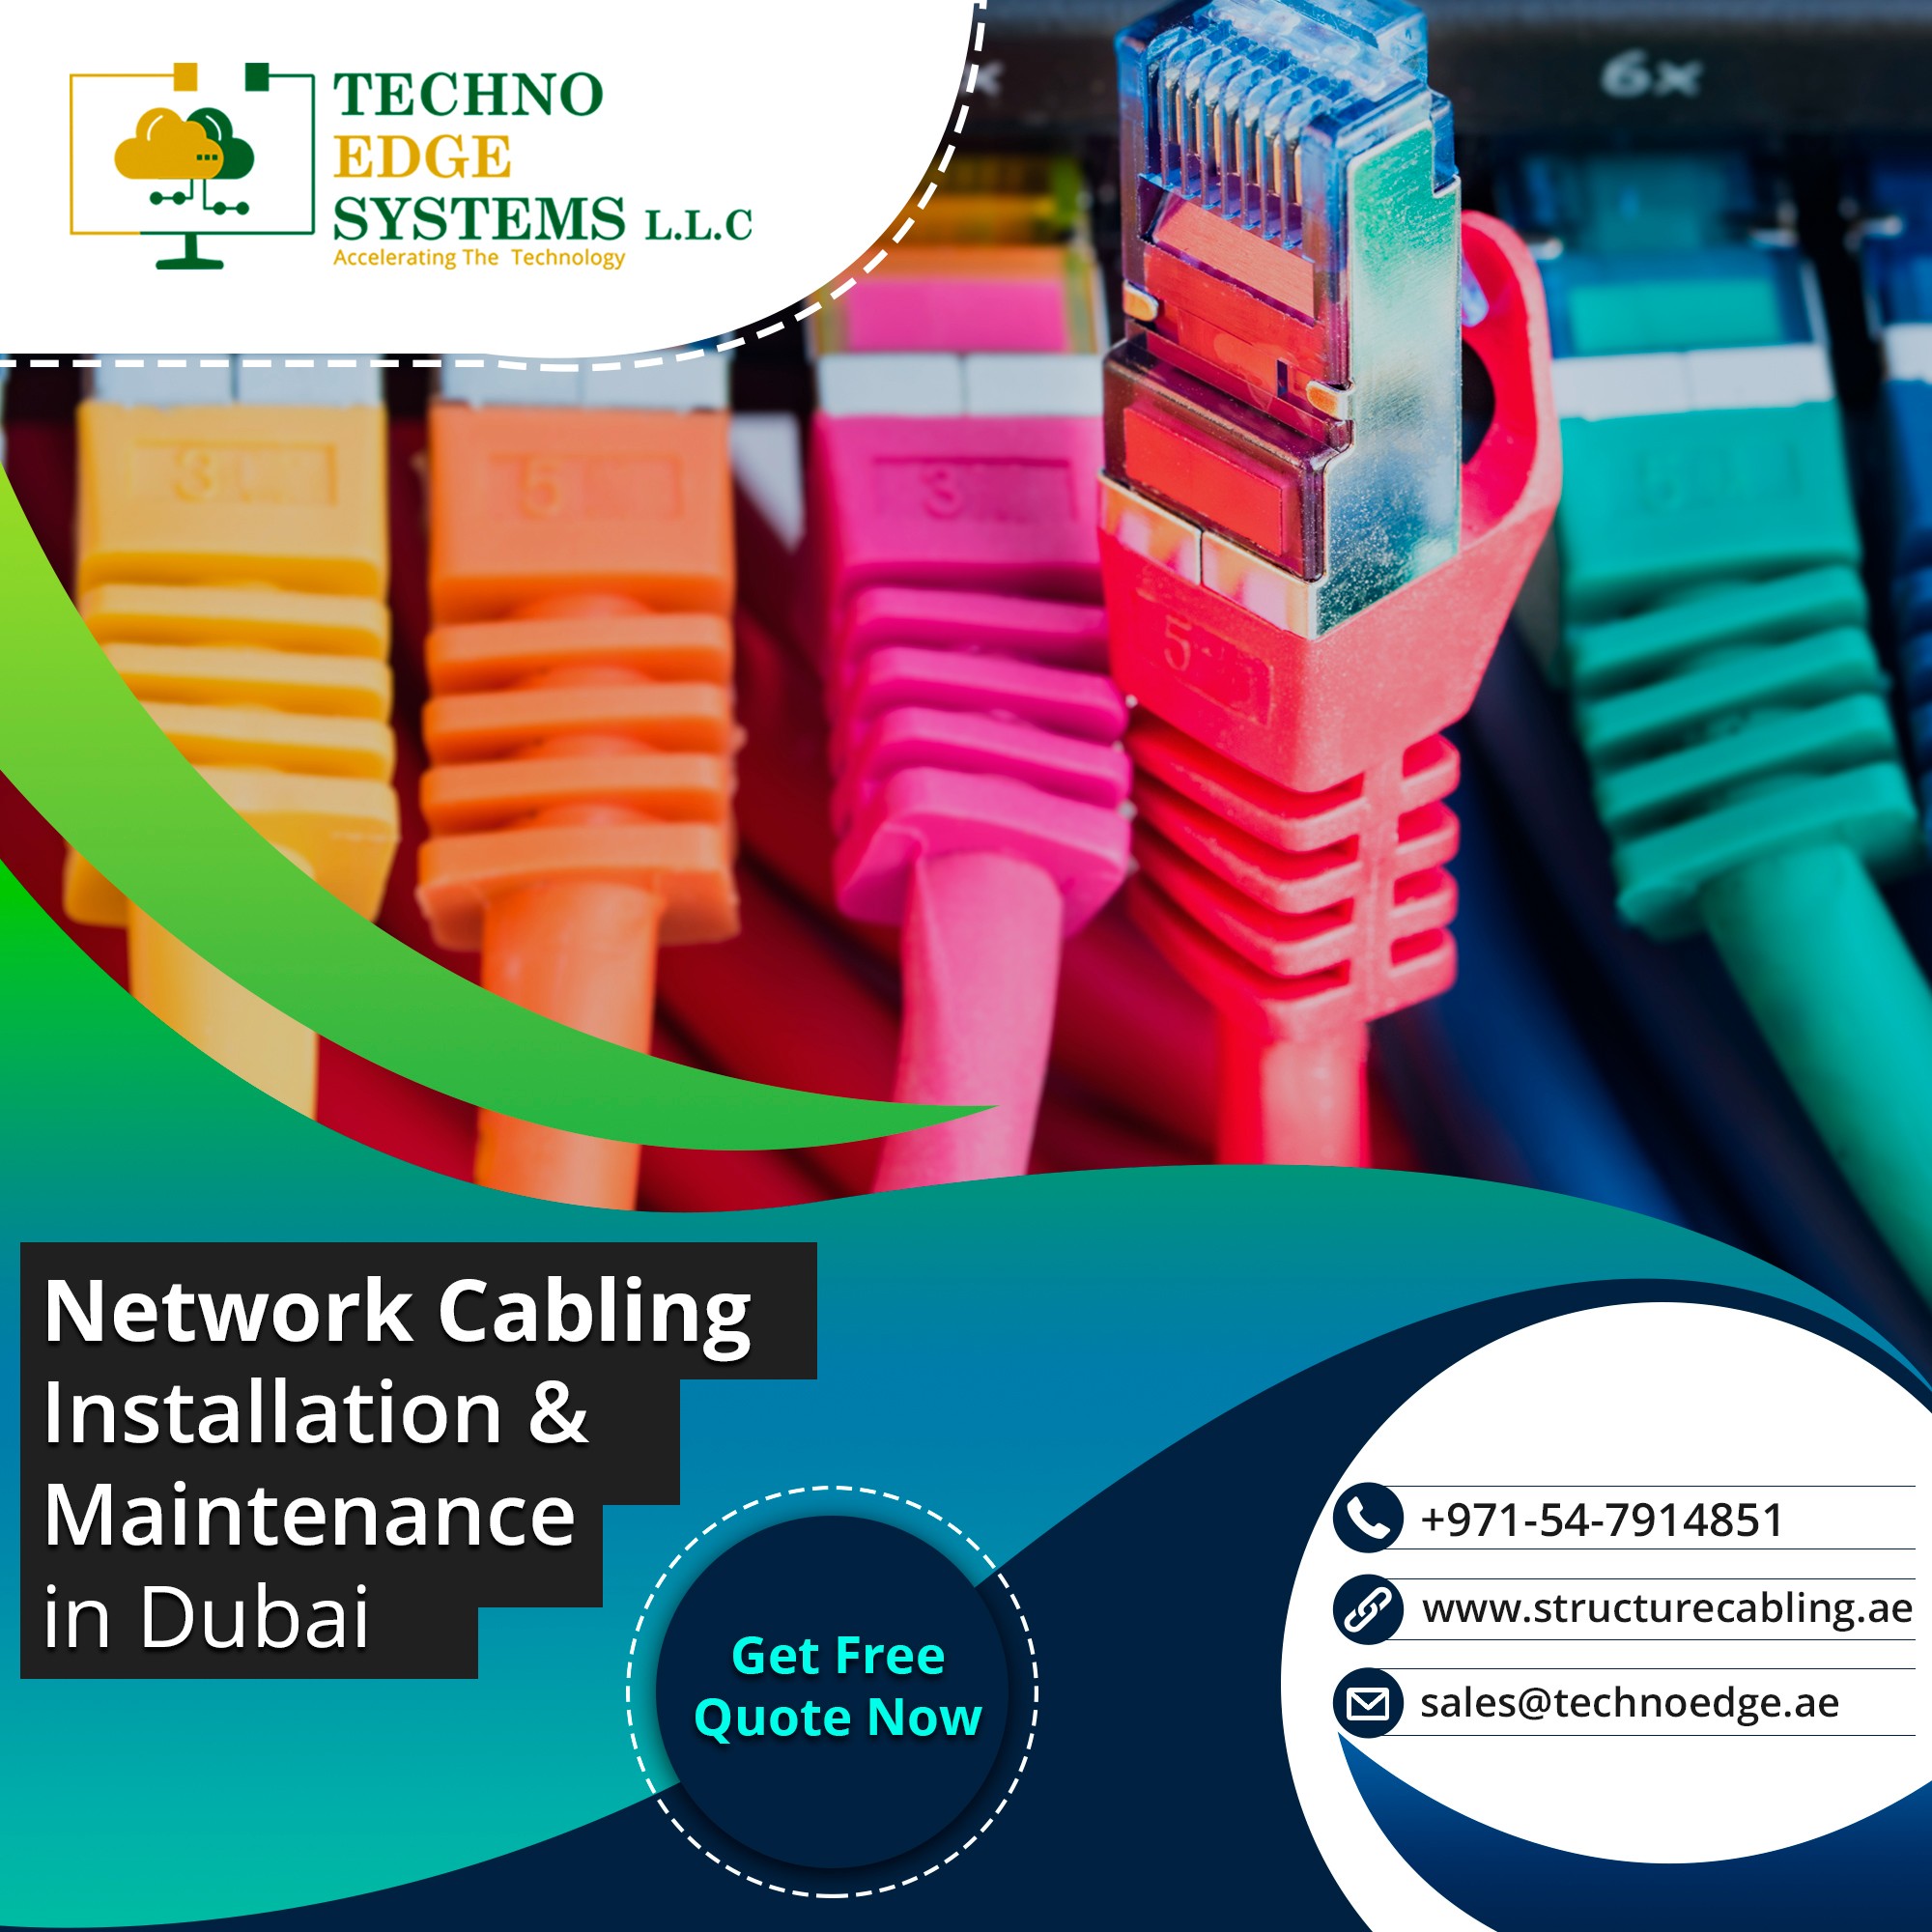 Hassle Free Network Cabling Services in Dubai